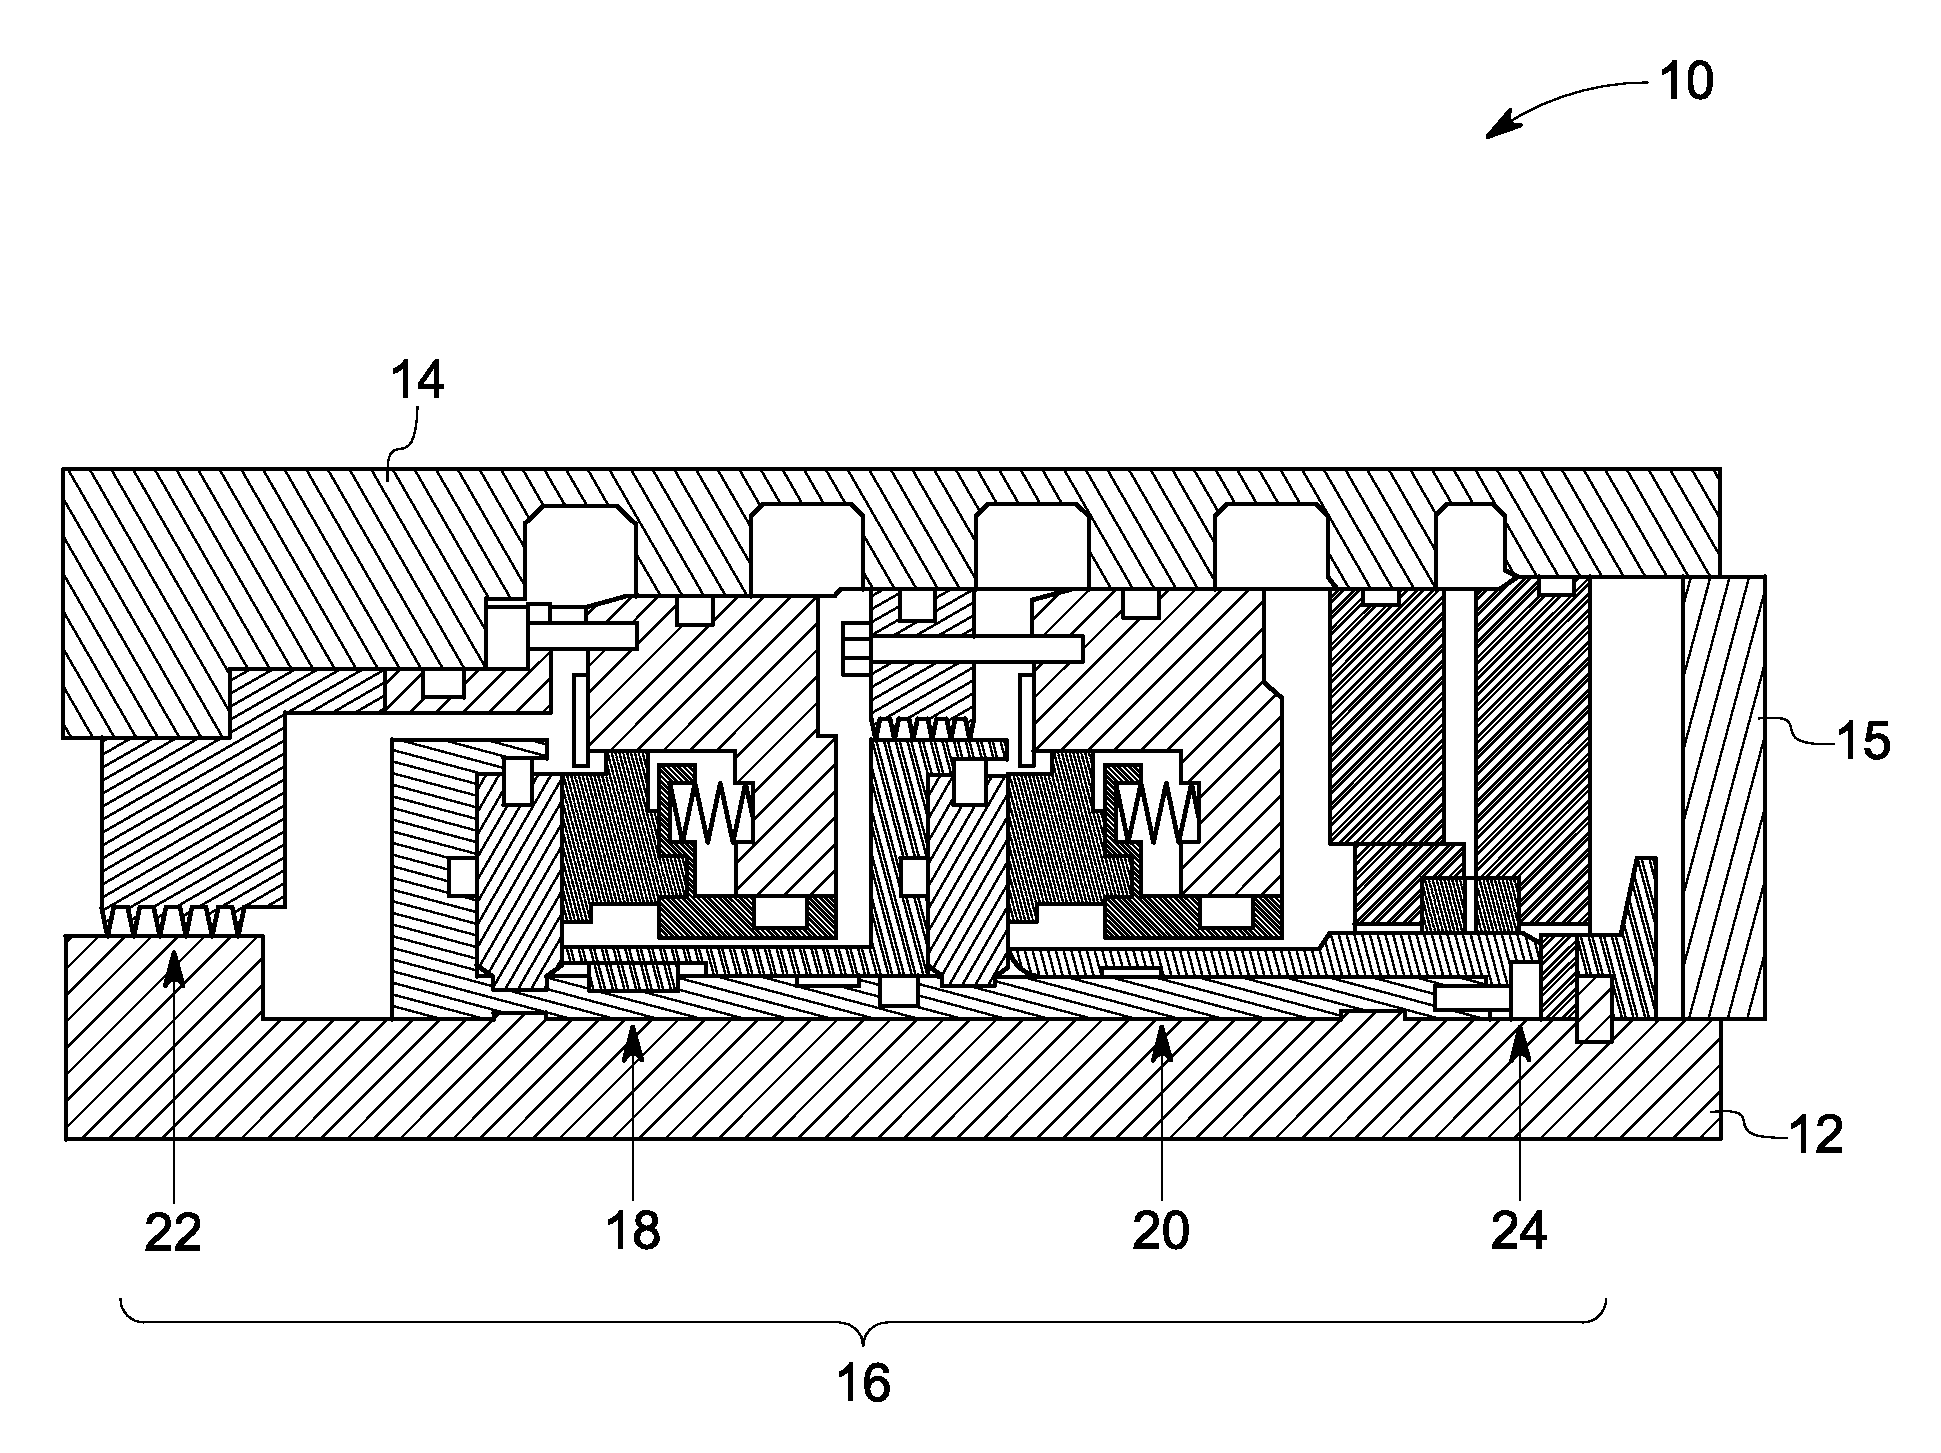 Barrier sealing system for centrifugal compressors